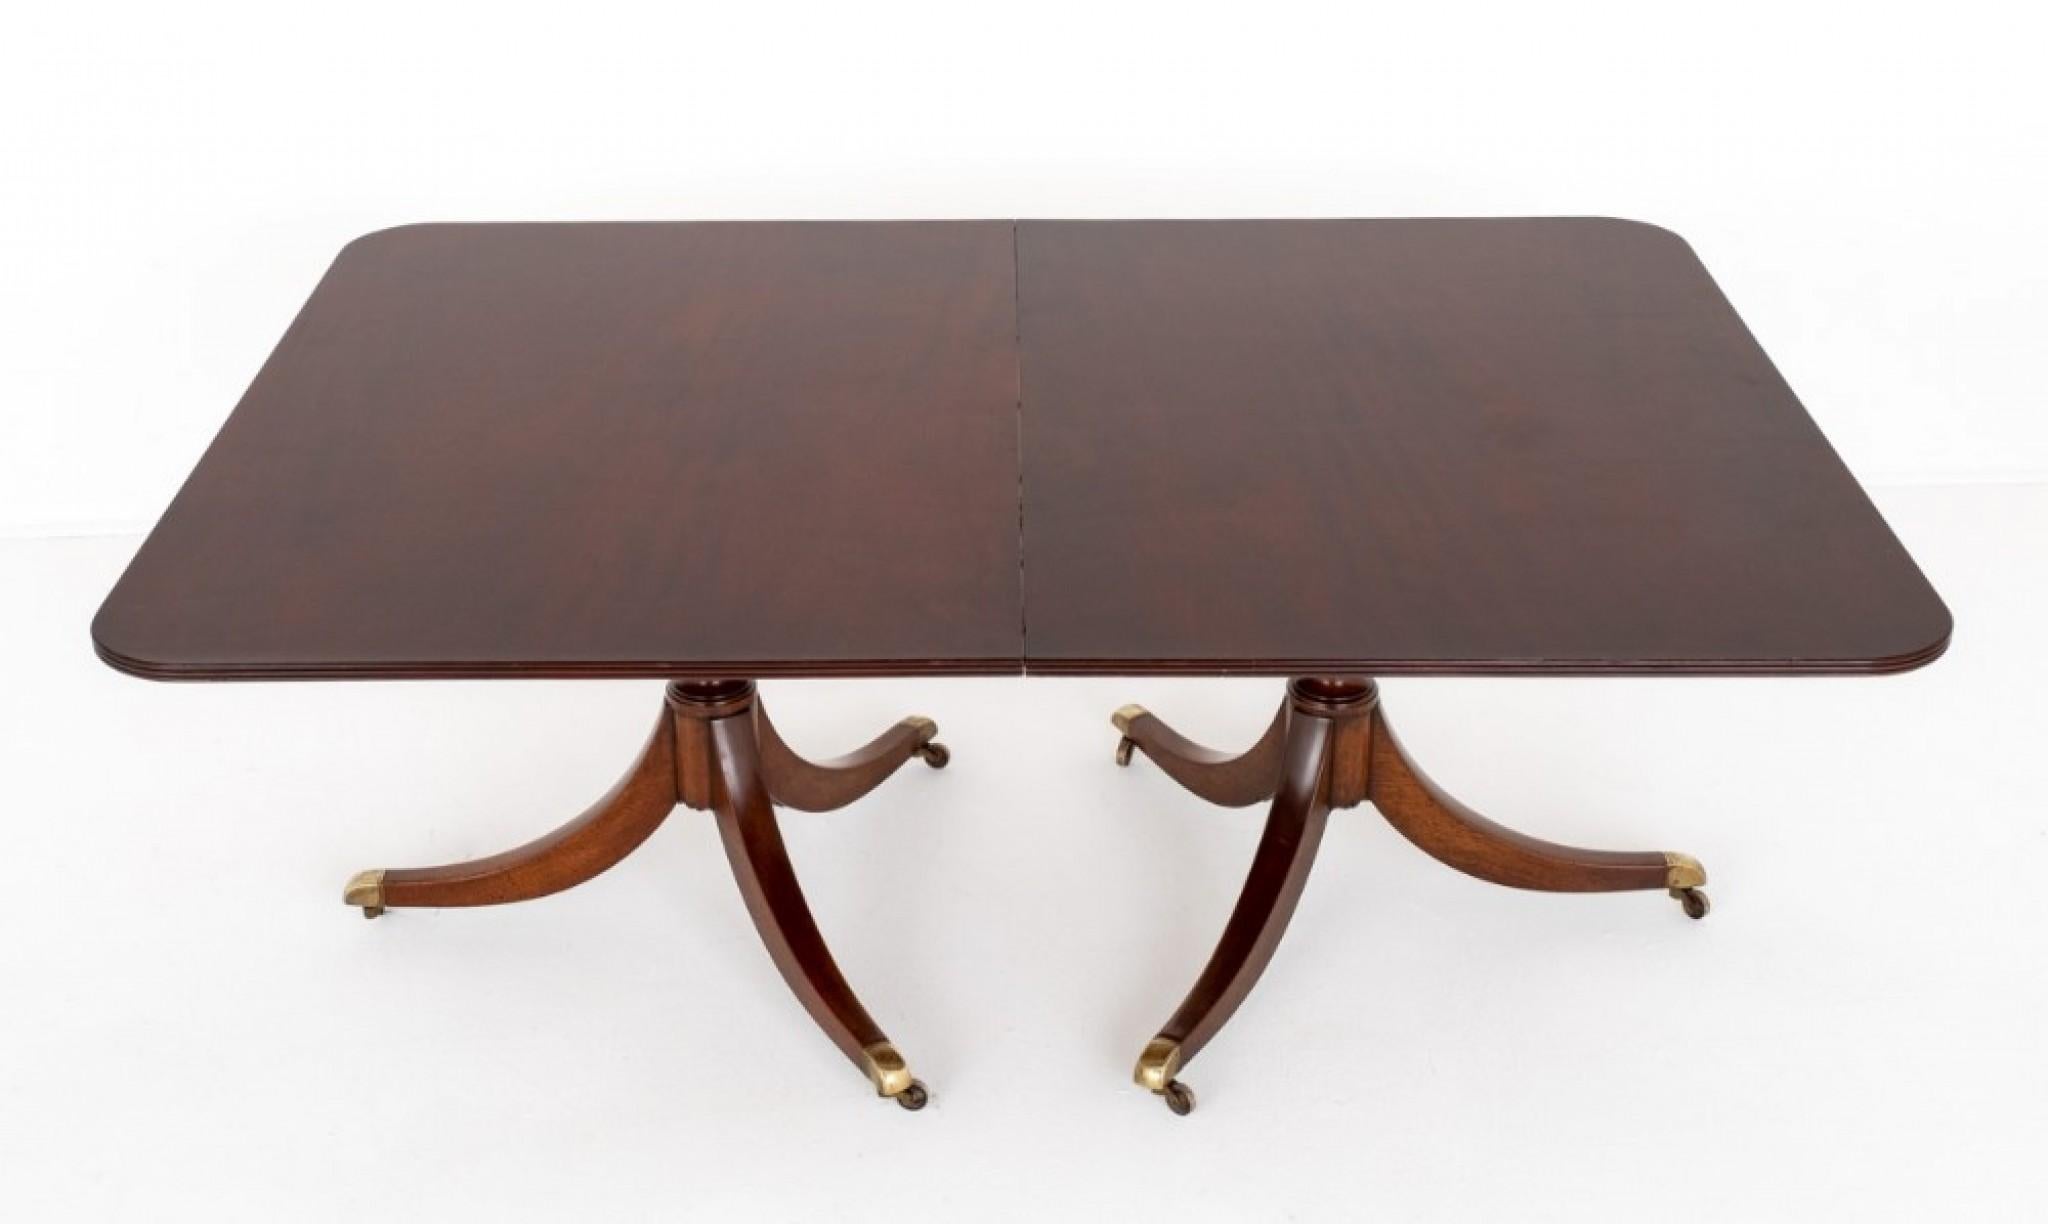 Regency Dining Table - Mahogany 2 Pedestal Period Antique For Sale 1